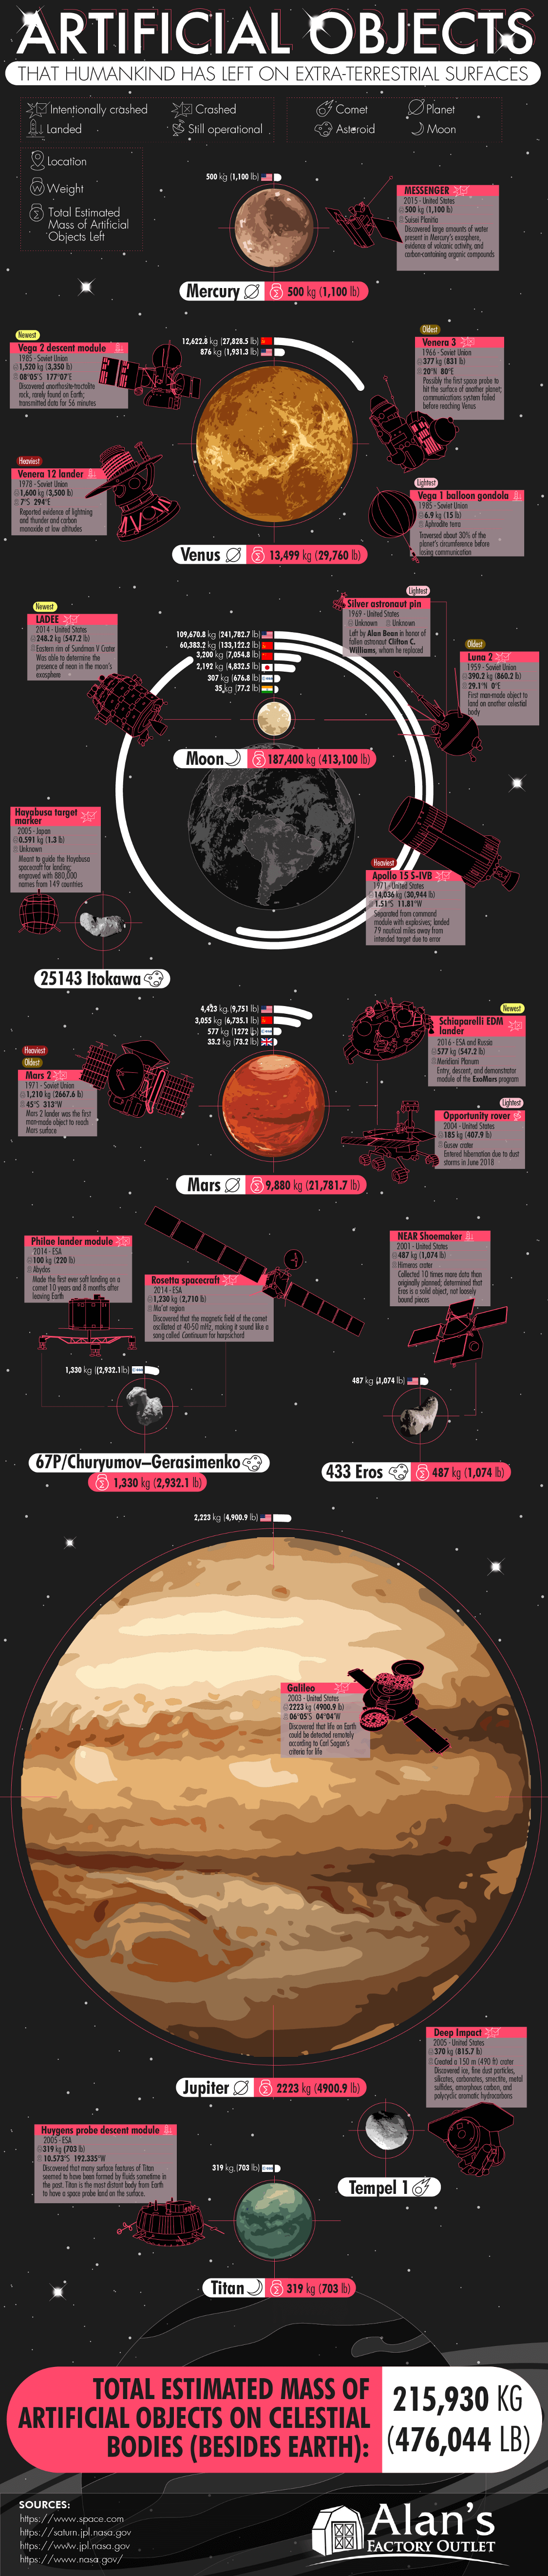 Humankind’s Track Record for Creating ‘Space Junk’ - Infographic